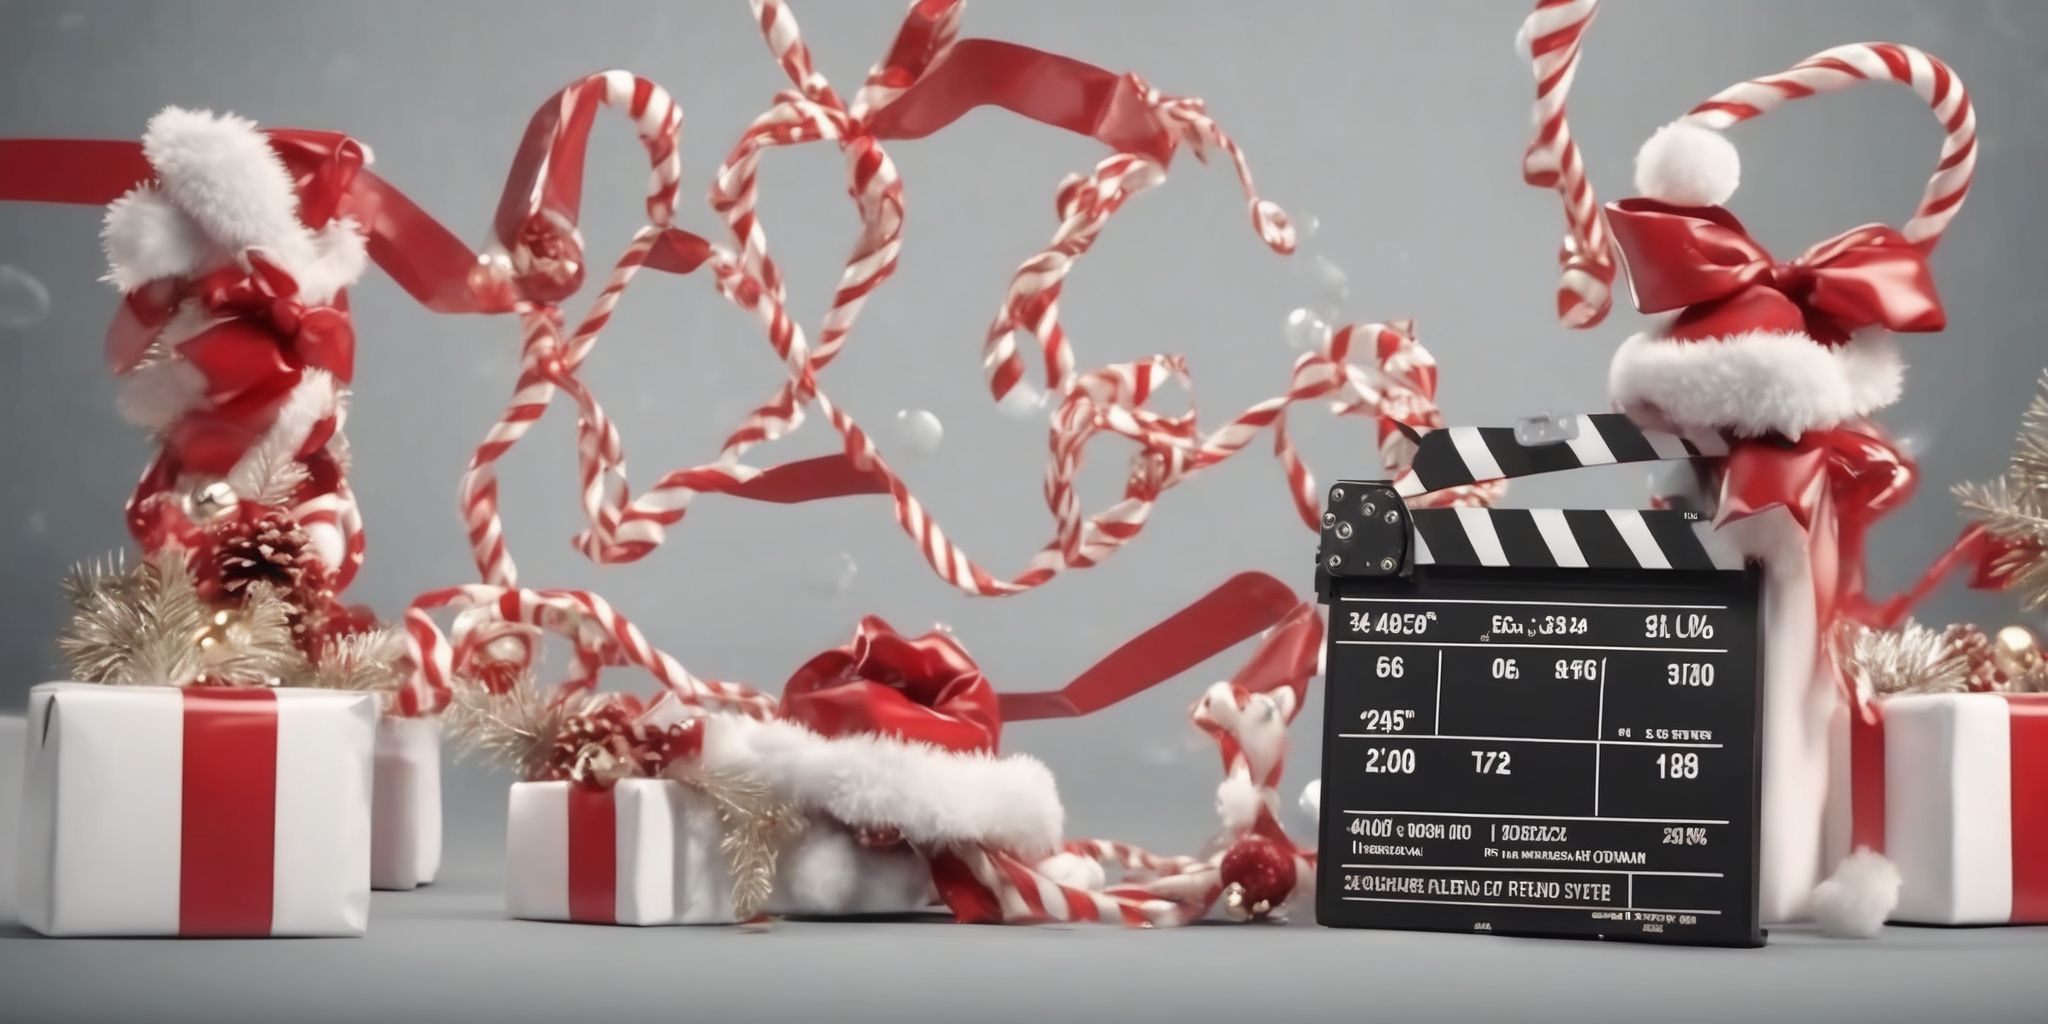 Reel film in realistic Christmas style